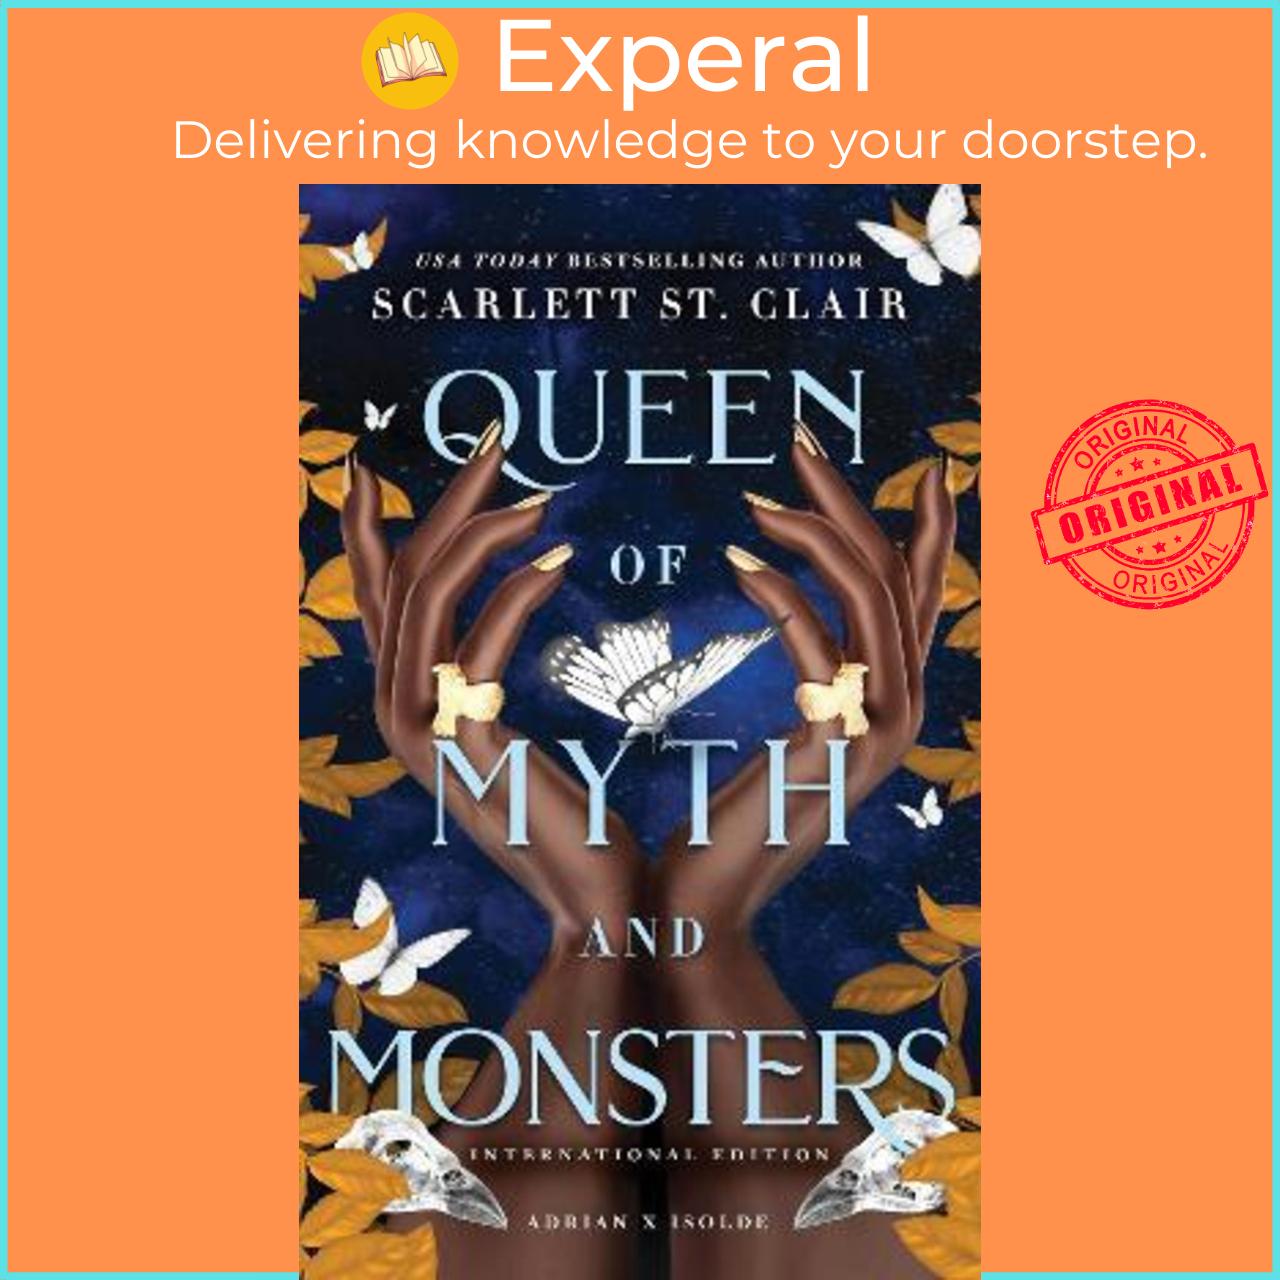 Sách - Queen of Myth and Monsters by Scarlett St. Clair (US edition, paperback)